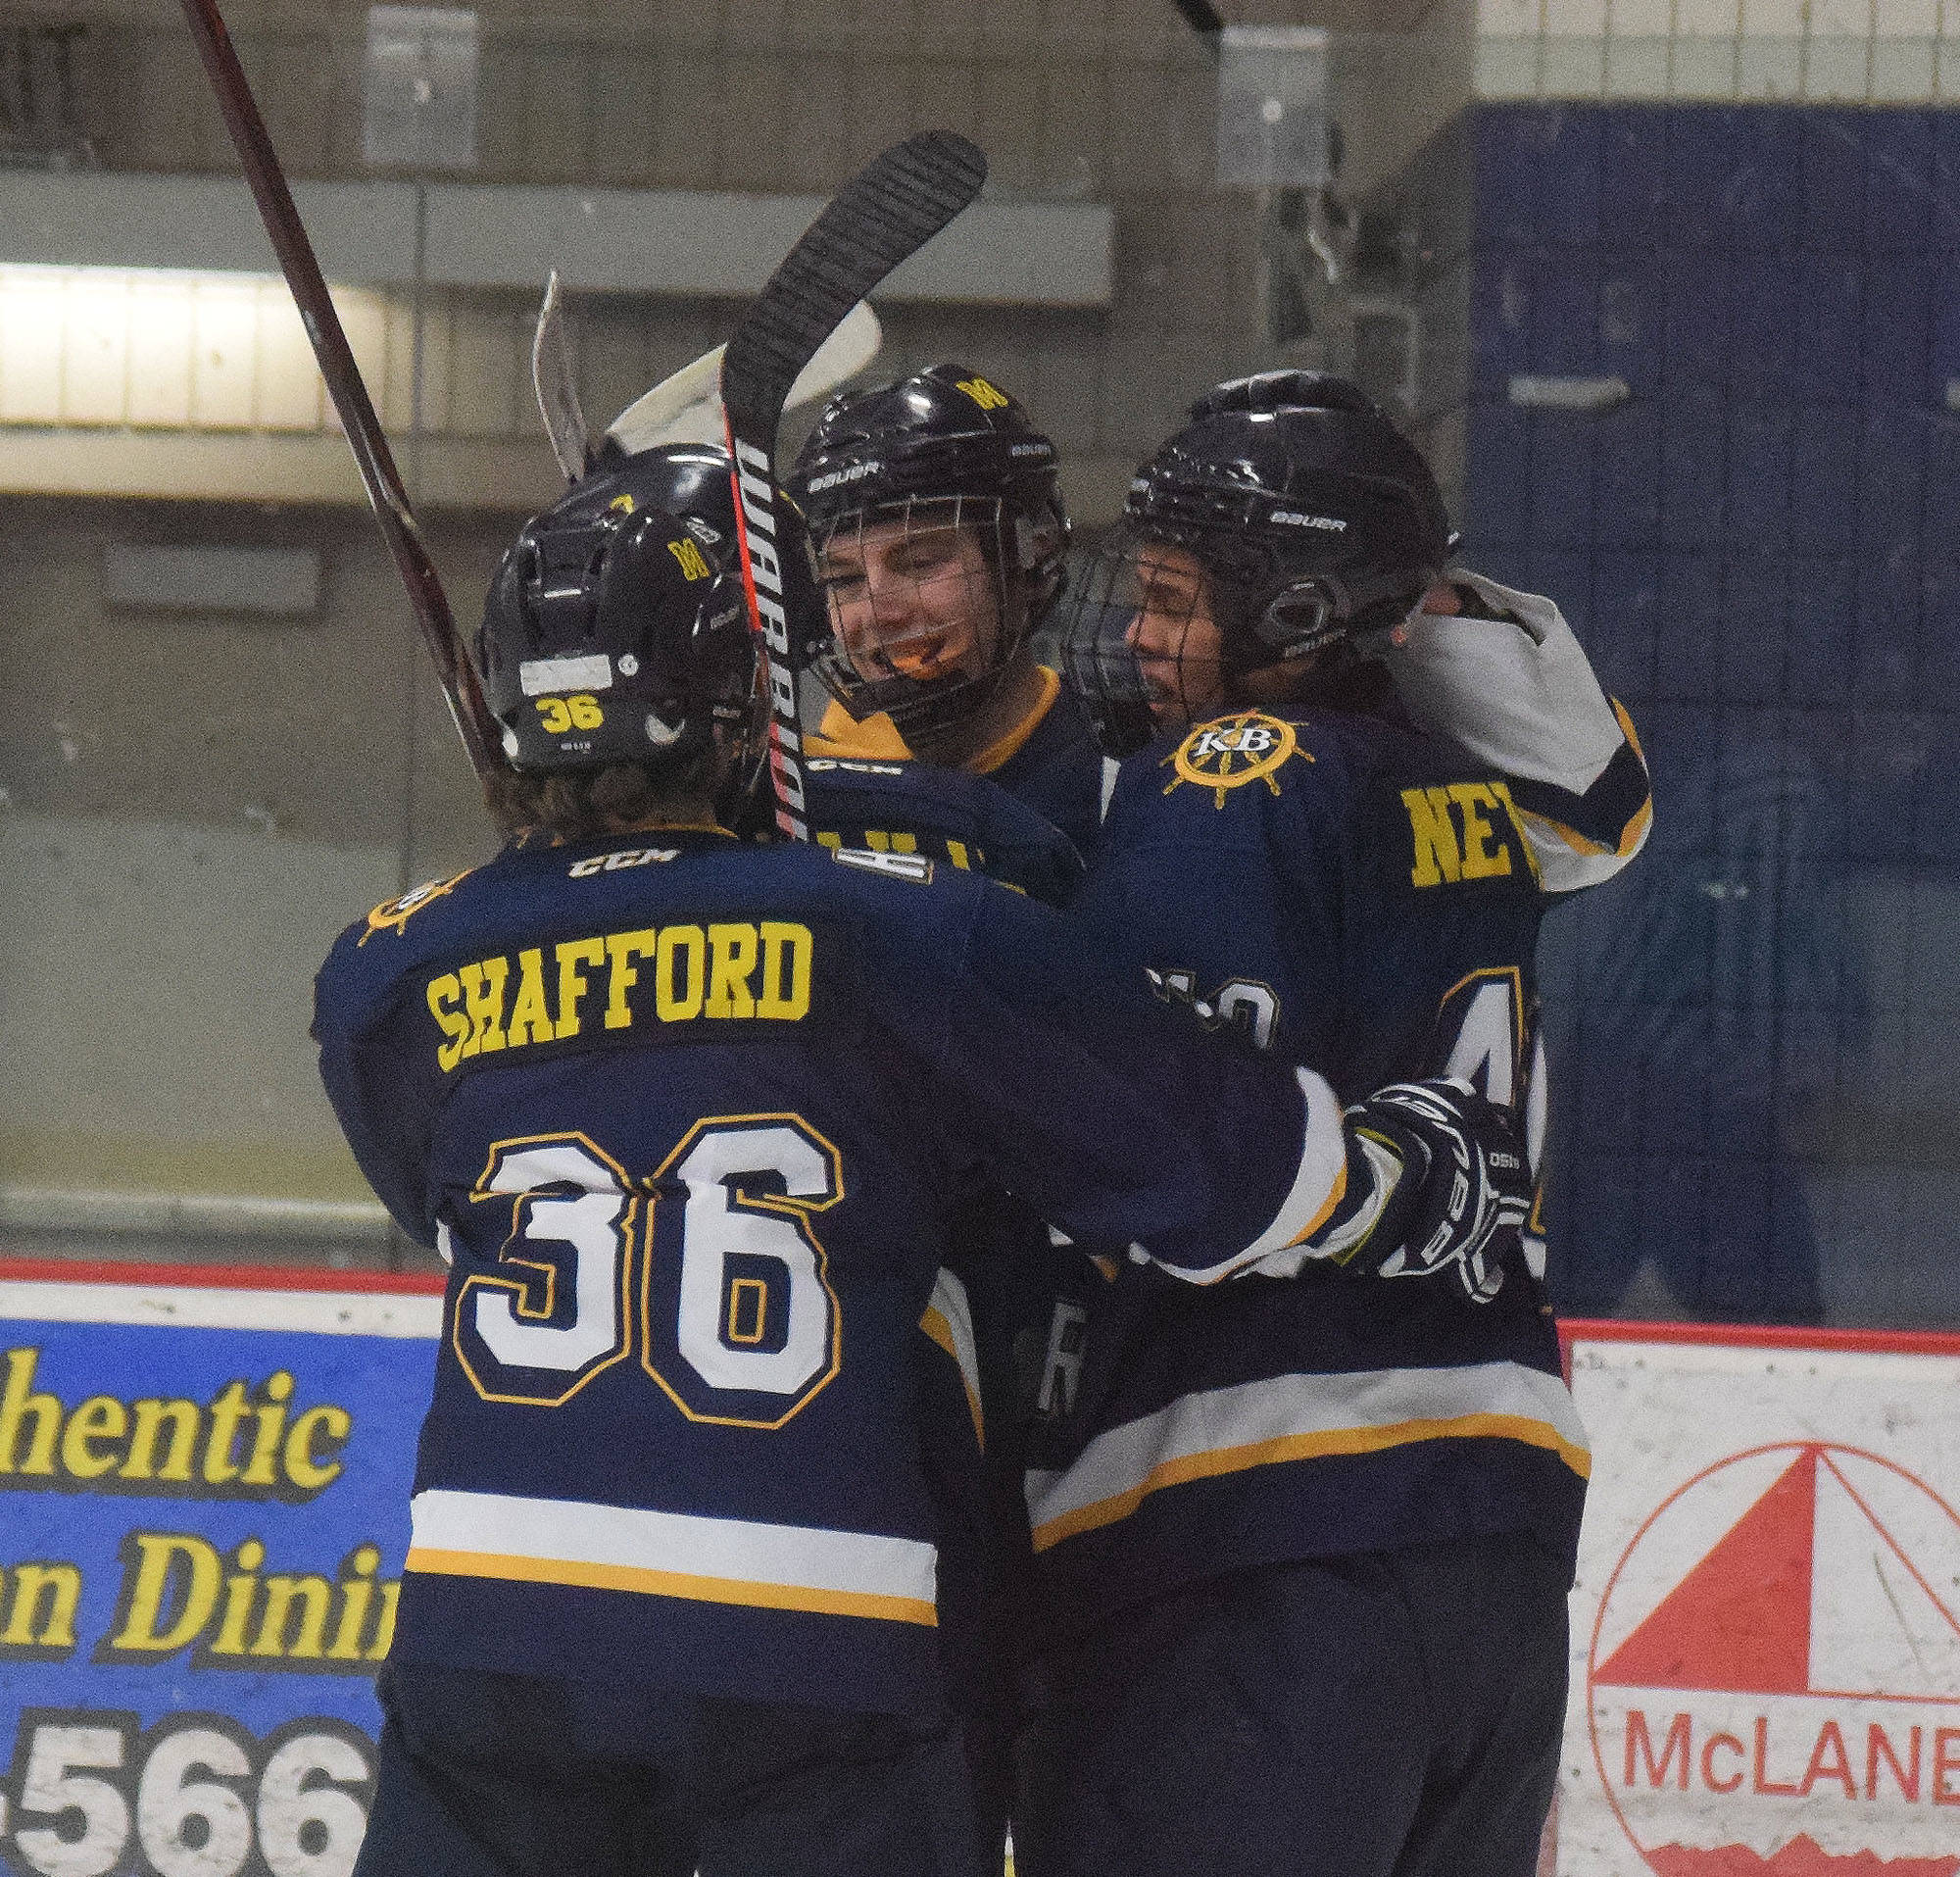 Homer skater Tyler Gilliland (center) celebrates with teammates after scoring a goal in the second period Tuesday night against Soldotna at the Soldotna Regional Sports Complex. (Photo by Joey Klecka/Peninsula Clarion)